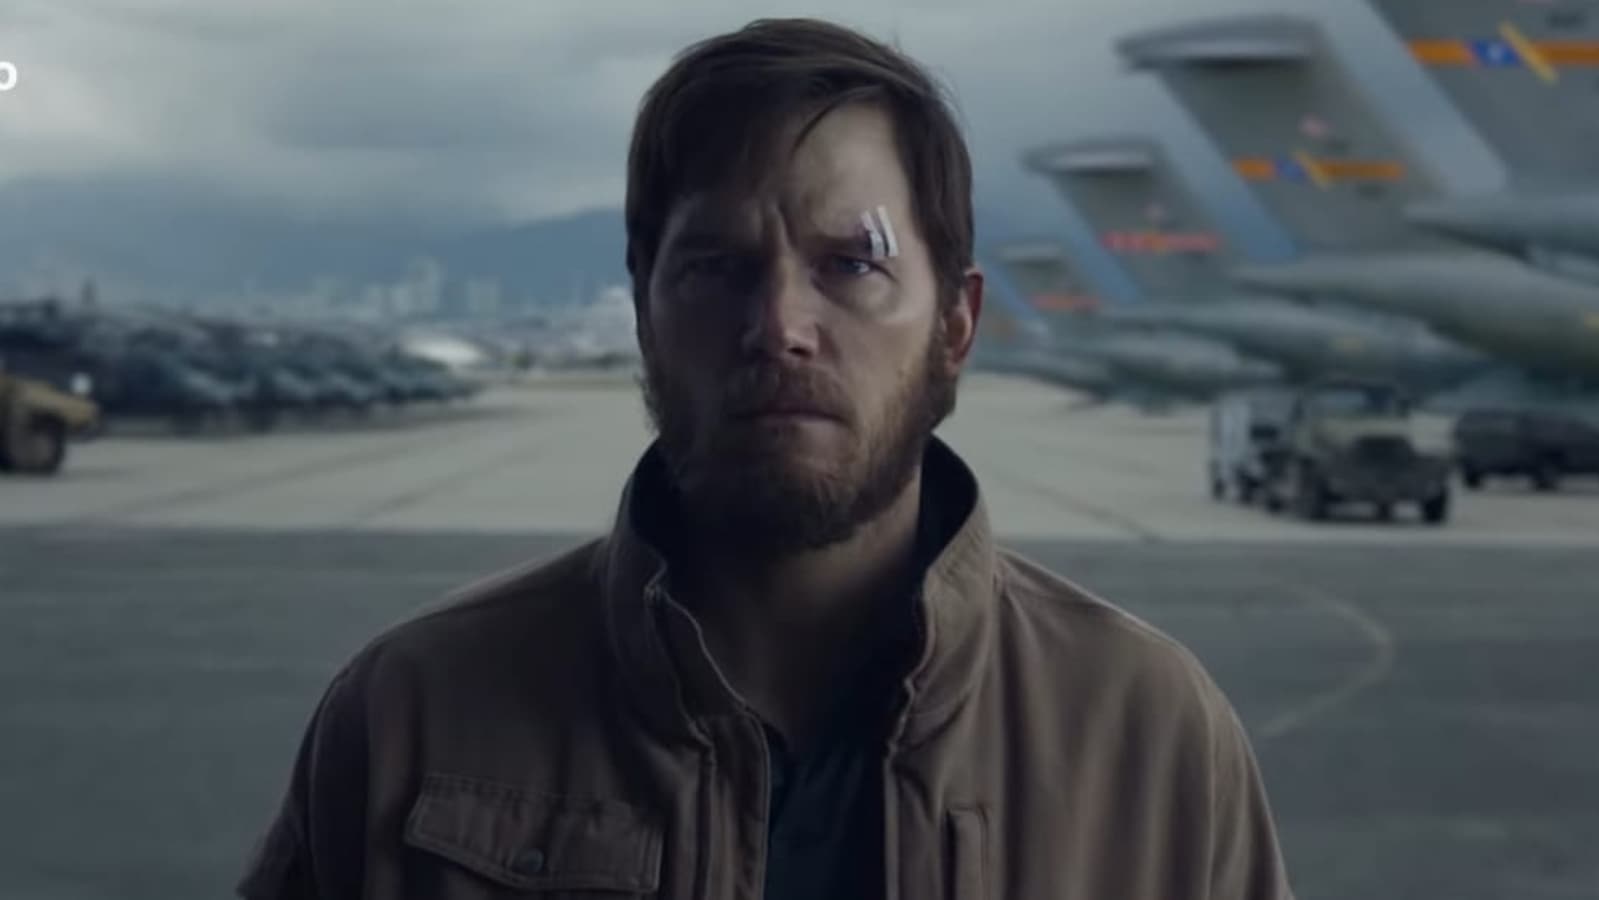 The Terminal List trailer: Chris Pratt is a Marine out to uncover the secrets behind his comrades’ deaths. Watch